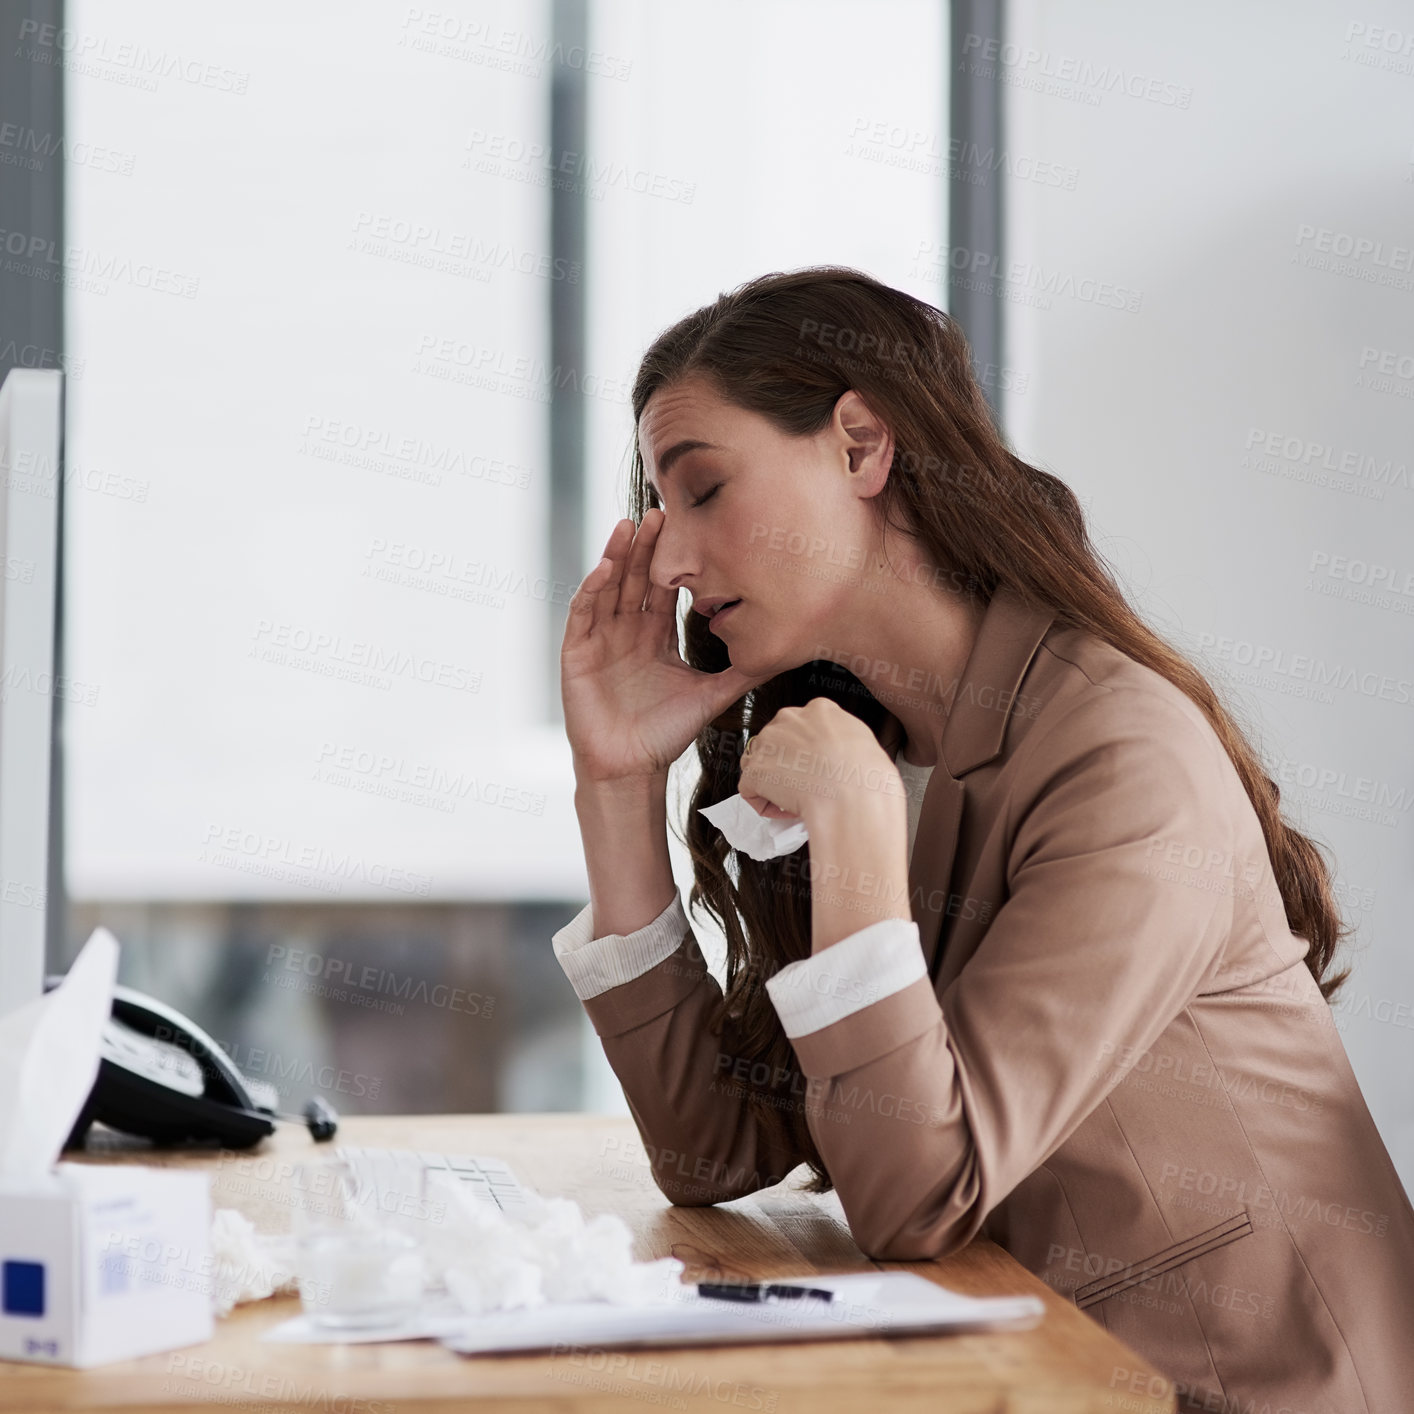 Buy stock photo Shot of a young businesswoman feeling unwell at work